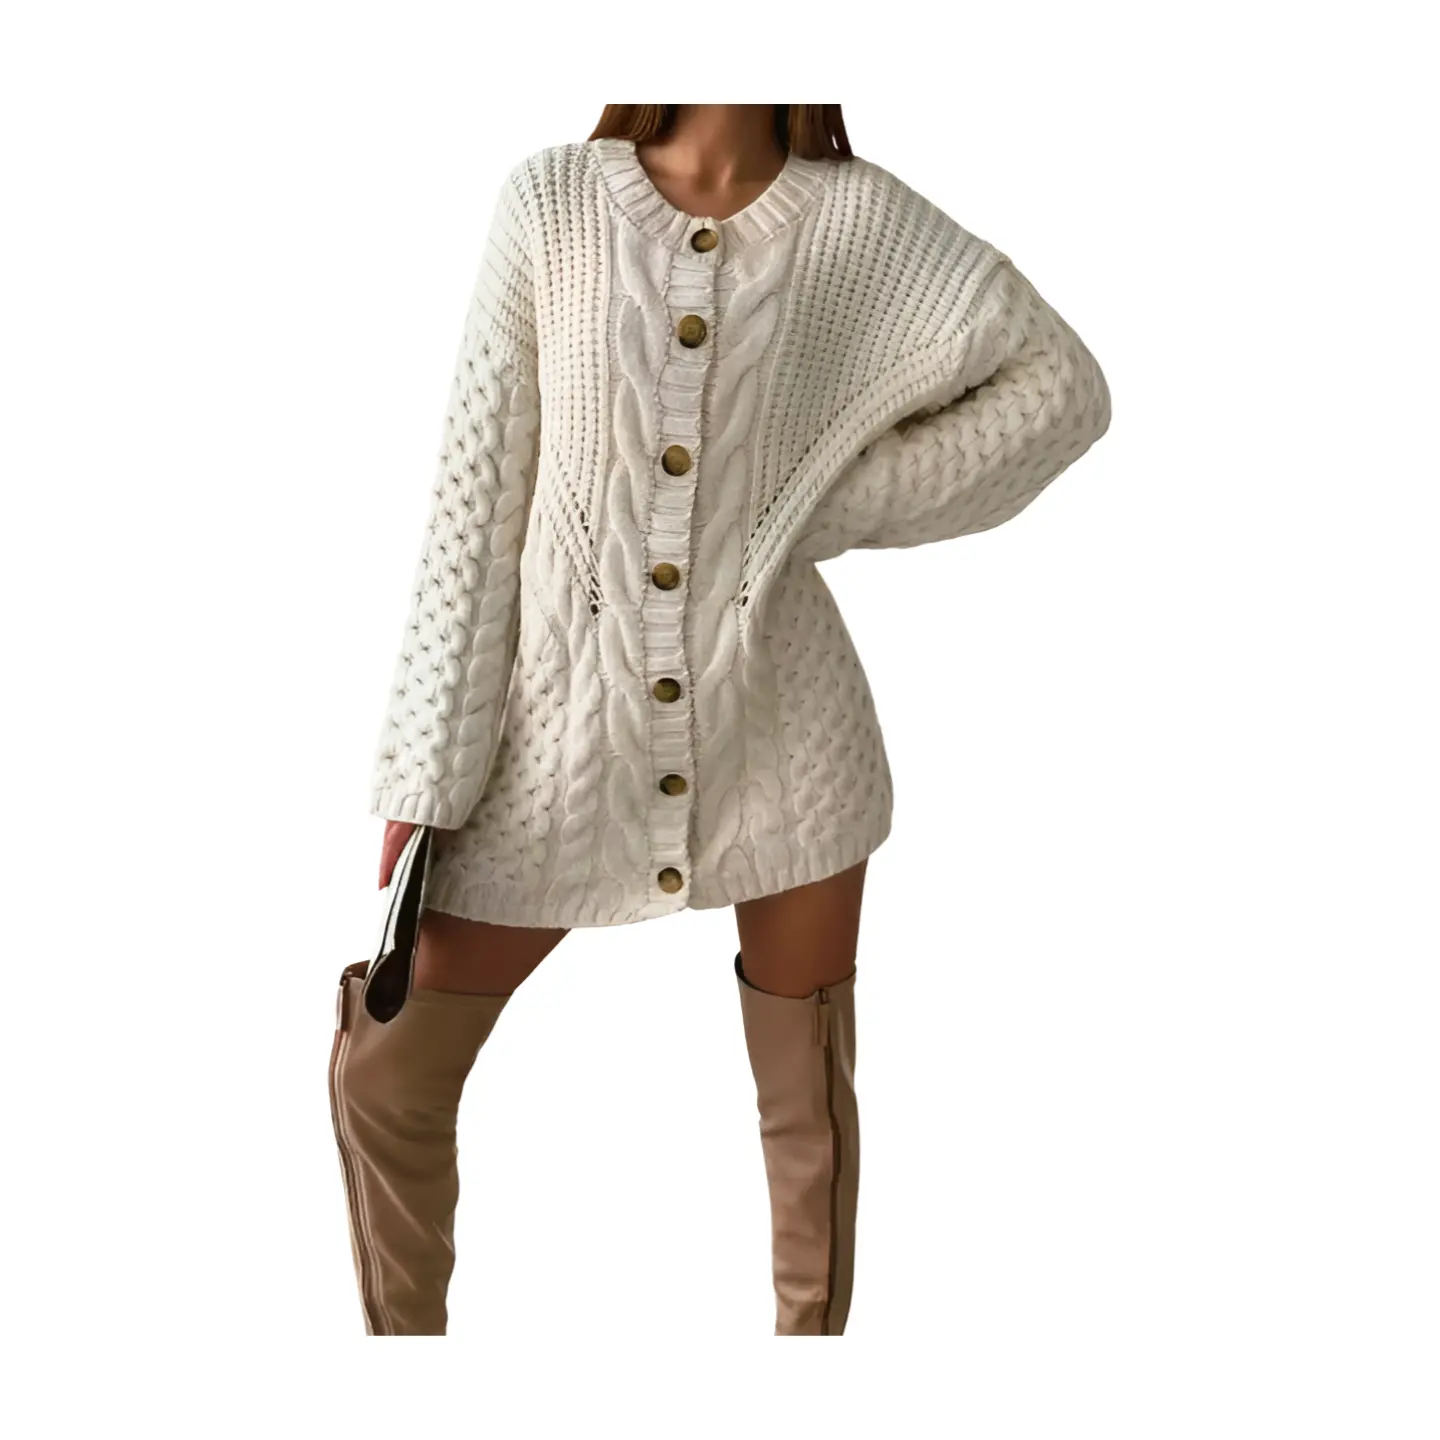 Customs Colors Anti Shrink Best Handmade Sweaters Lazy 7 Gg Hand Knitted Sweater Women Cardigan Single Breasted Cardigans